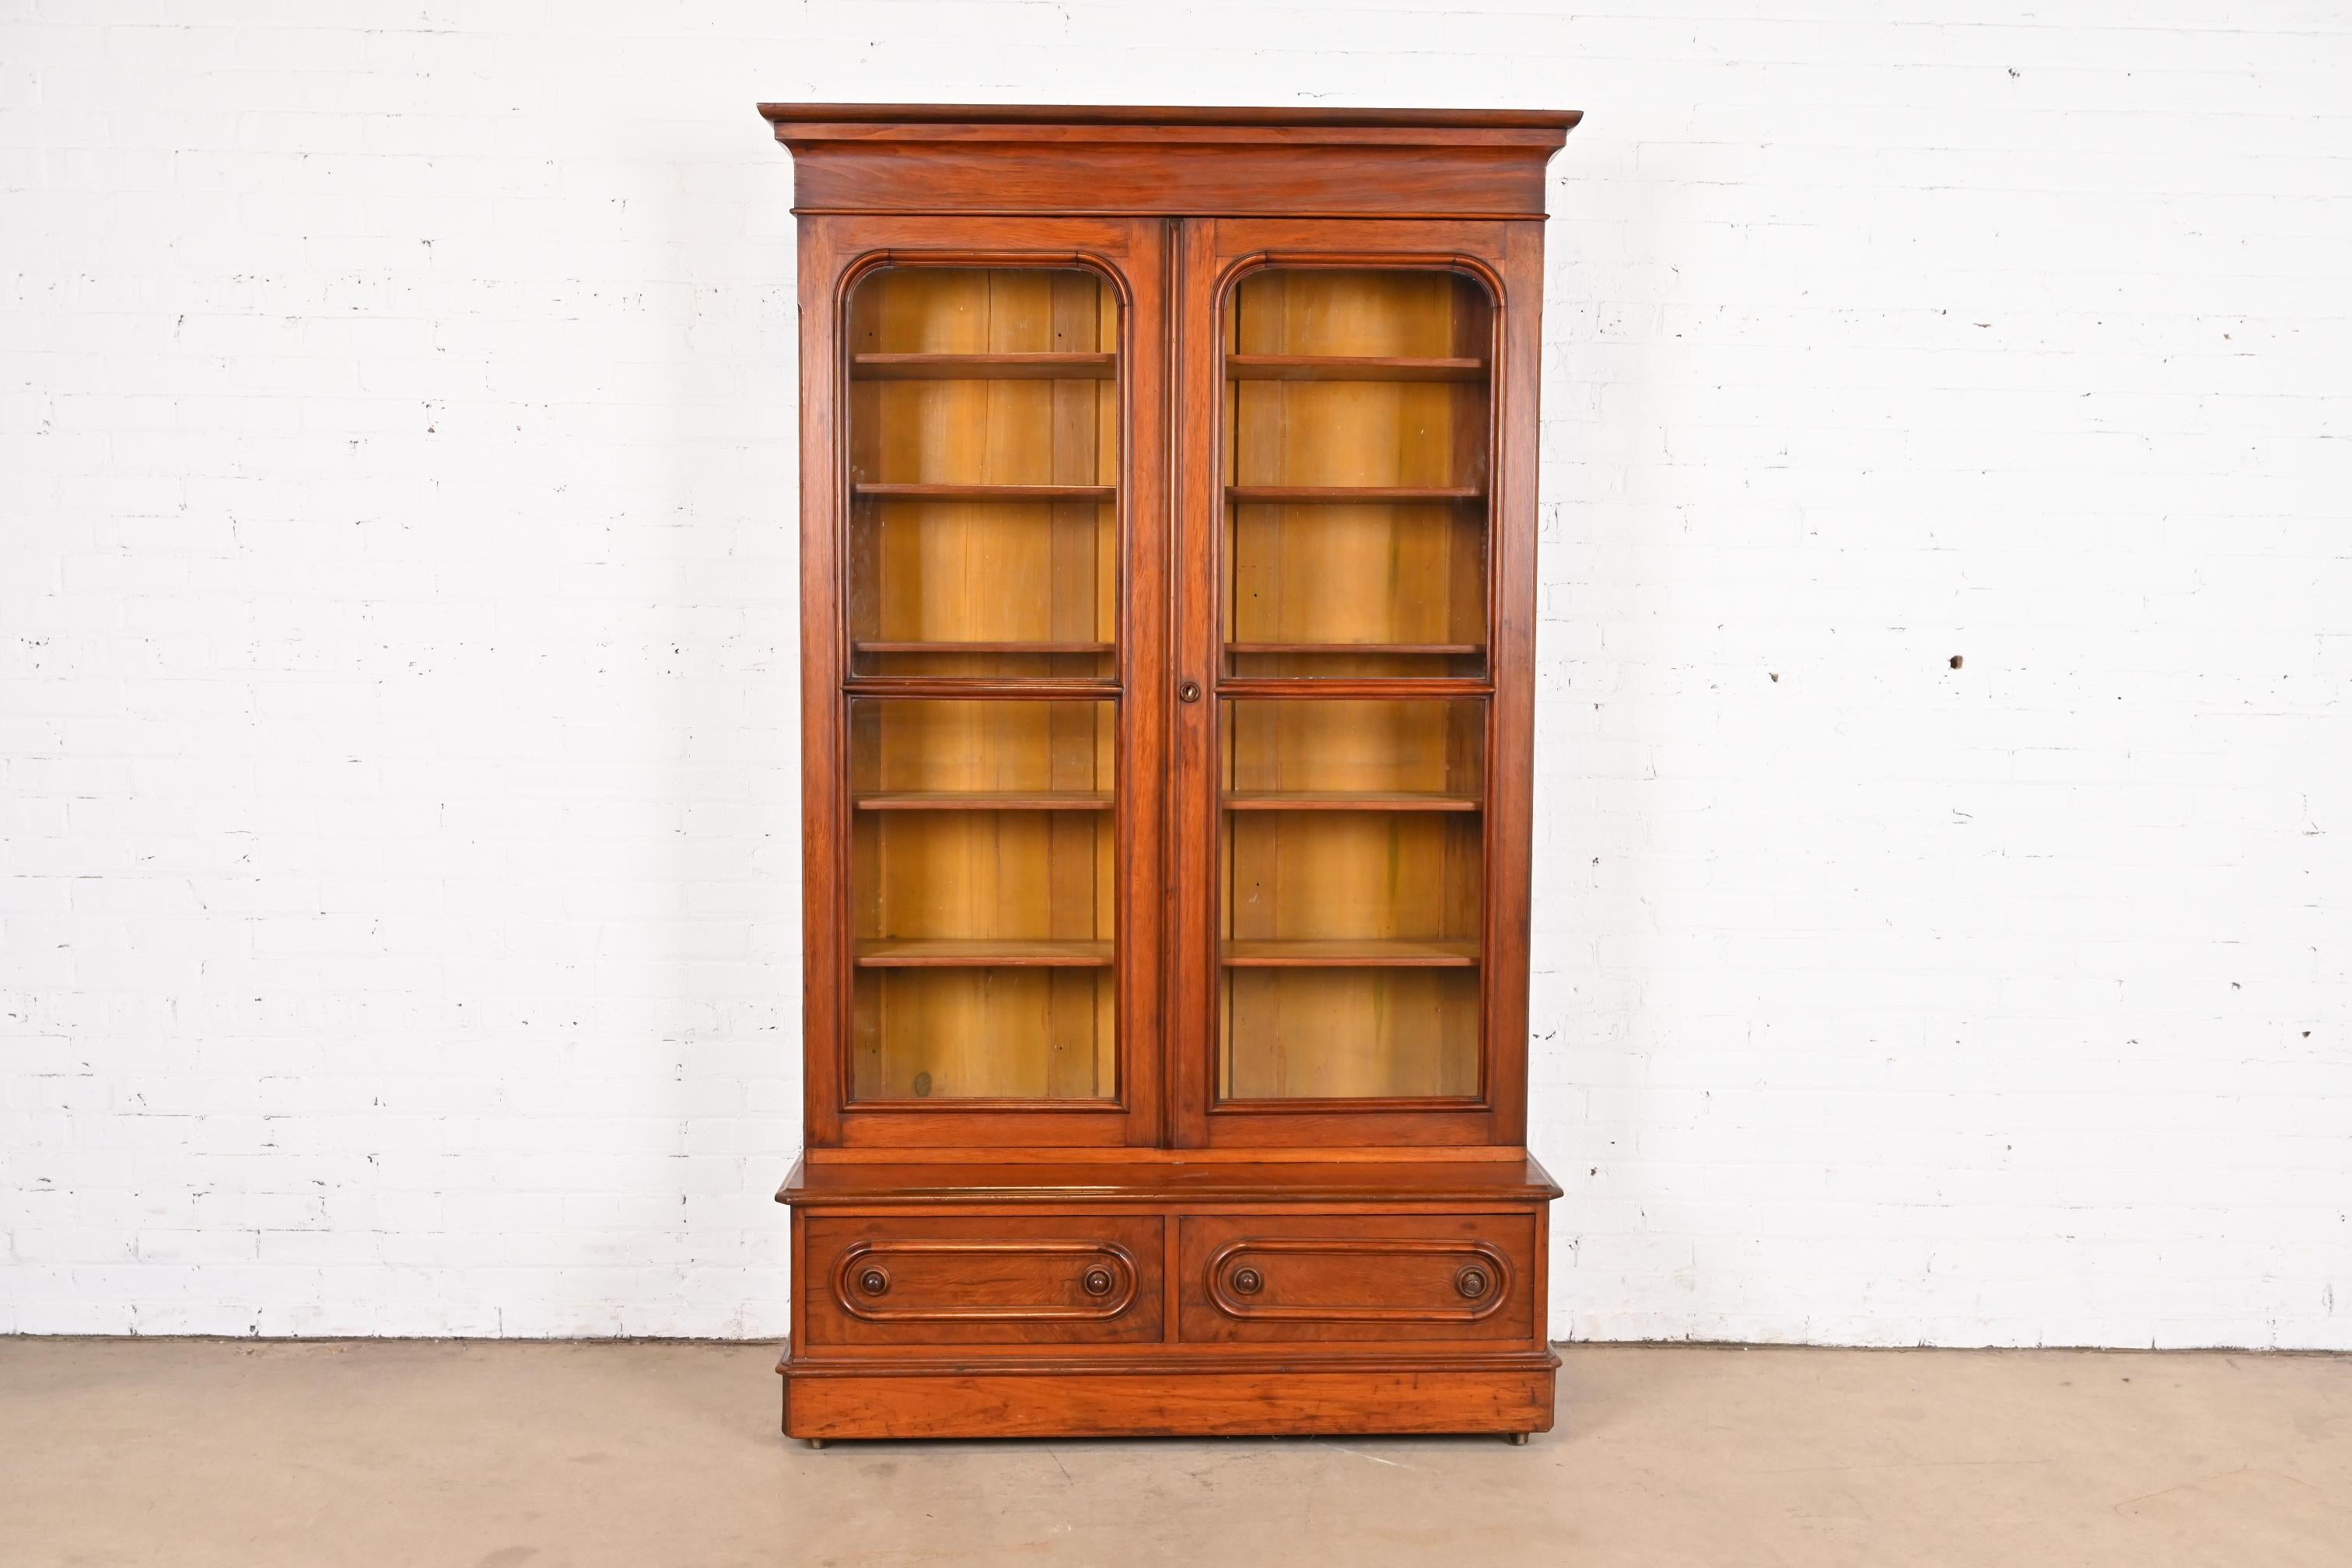 A beautiful antique Victorian two-door step back bookcase cabinet

USA, Circa 1880s

Carved walnut, with glass front doors.

Measures: 50